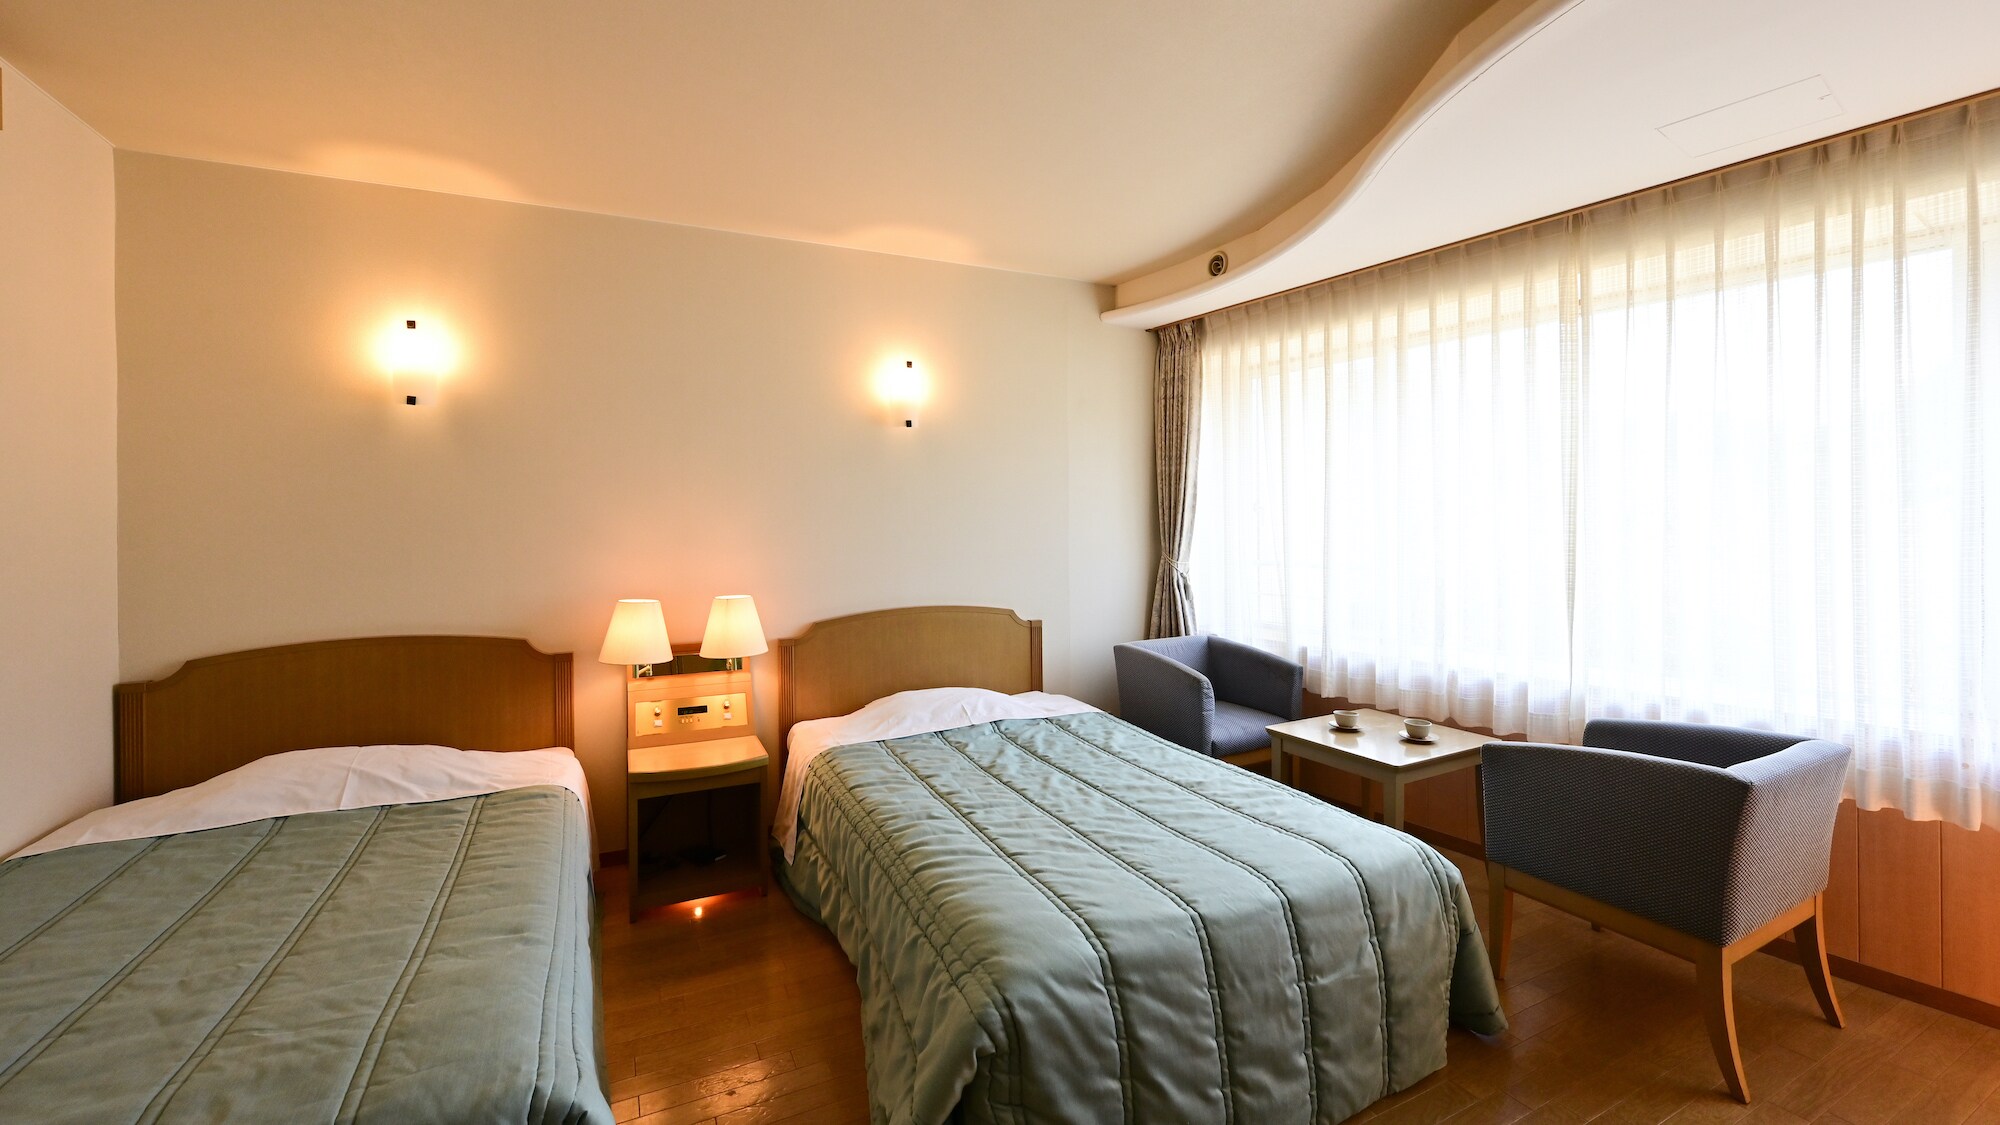 [Lake view / Western room] A landscape that fills the window. The Western-style room can accommodate up to 2 people.